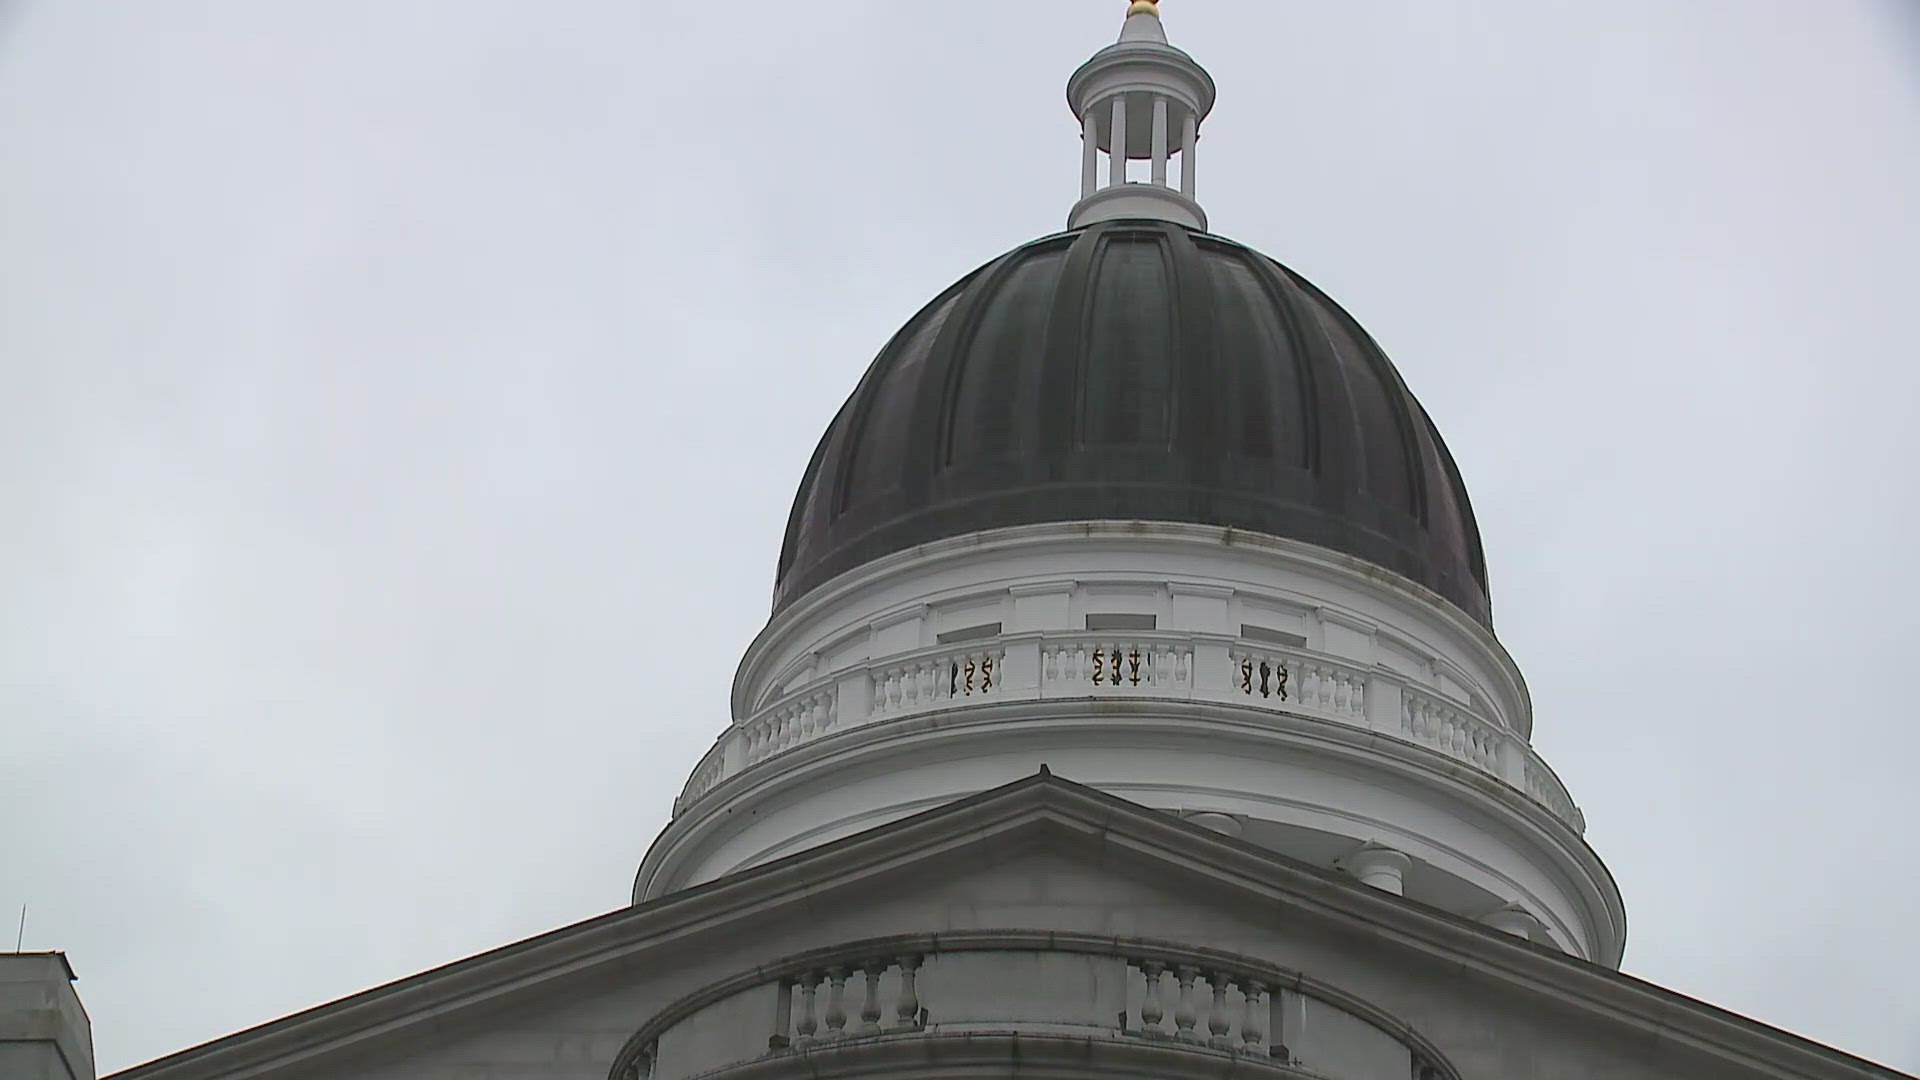 The threats were made toward two legislators, the State House, and the Maine Democratic Party, a news release from Maine Department of Public Safety stated.